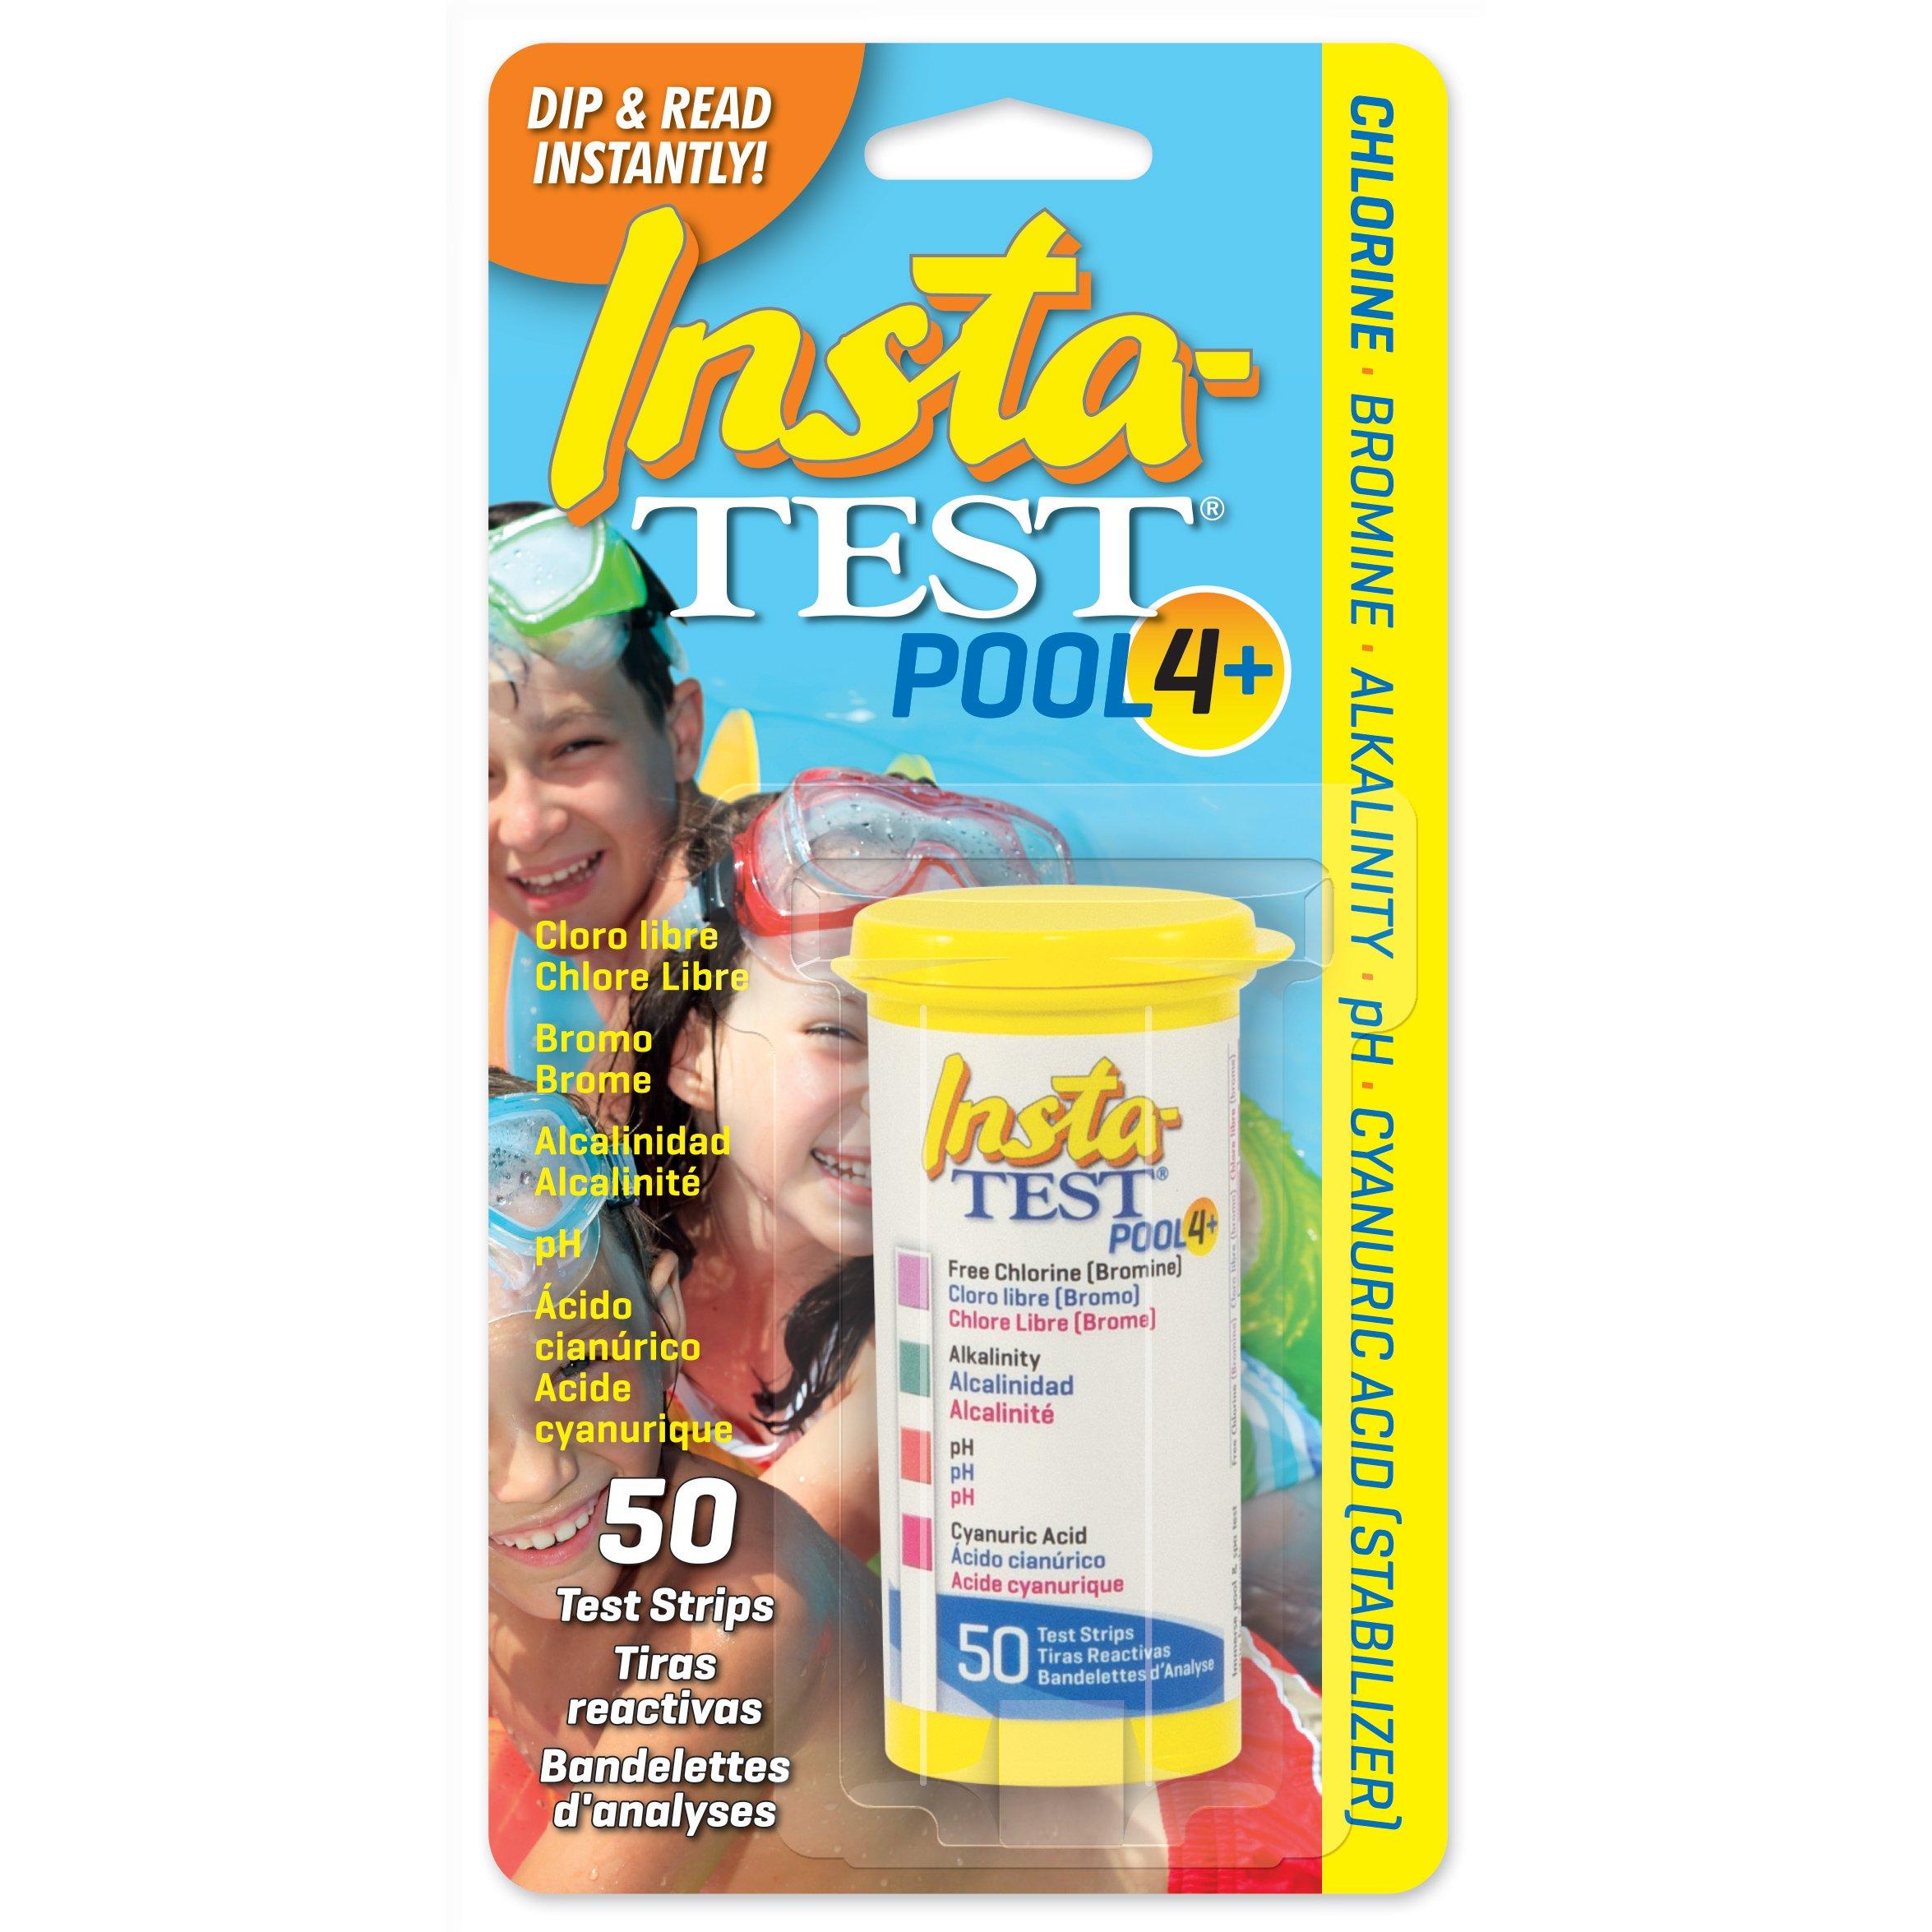 LaMotte  Insta-TEST POOL 4 Plus Test Strips 50-Count